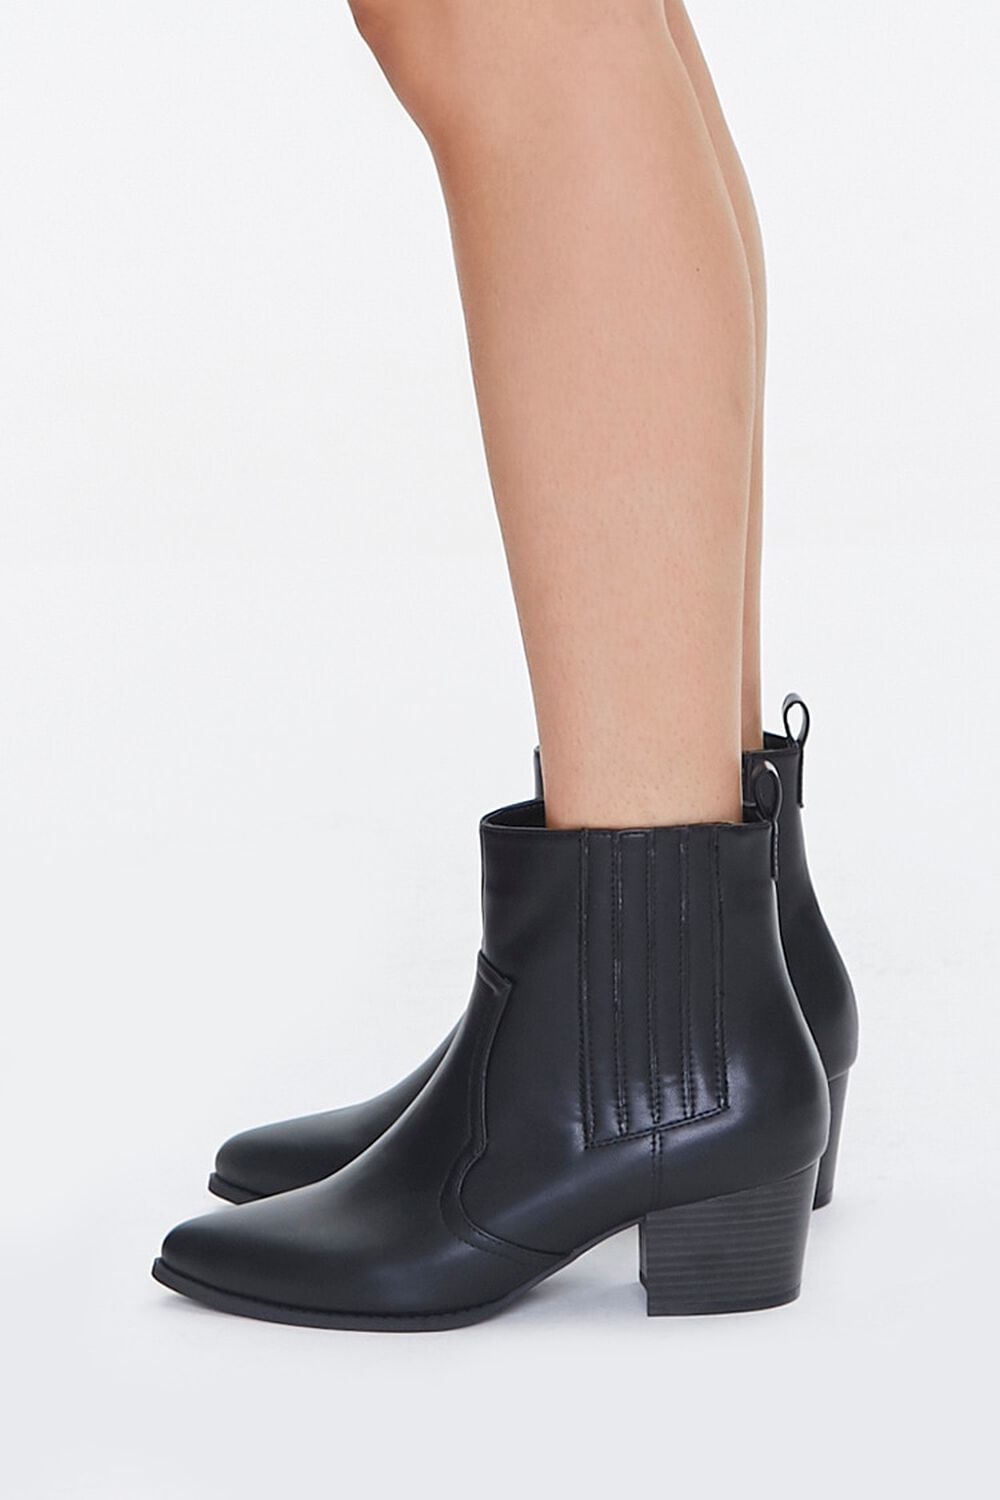 Faux Leather Pointed Toe Booties, image 2